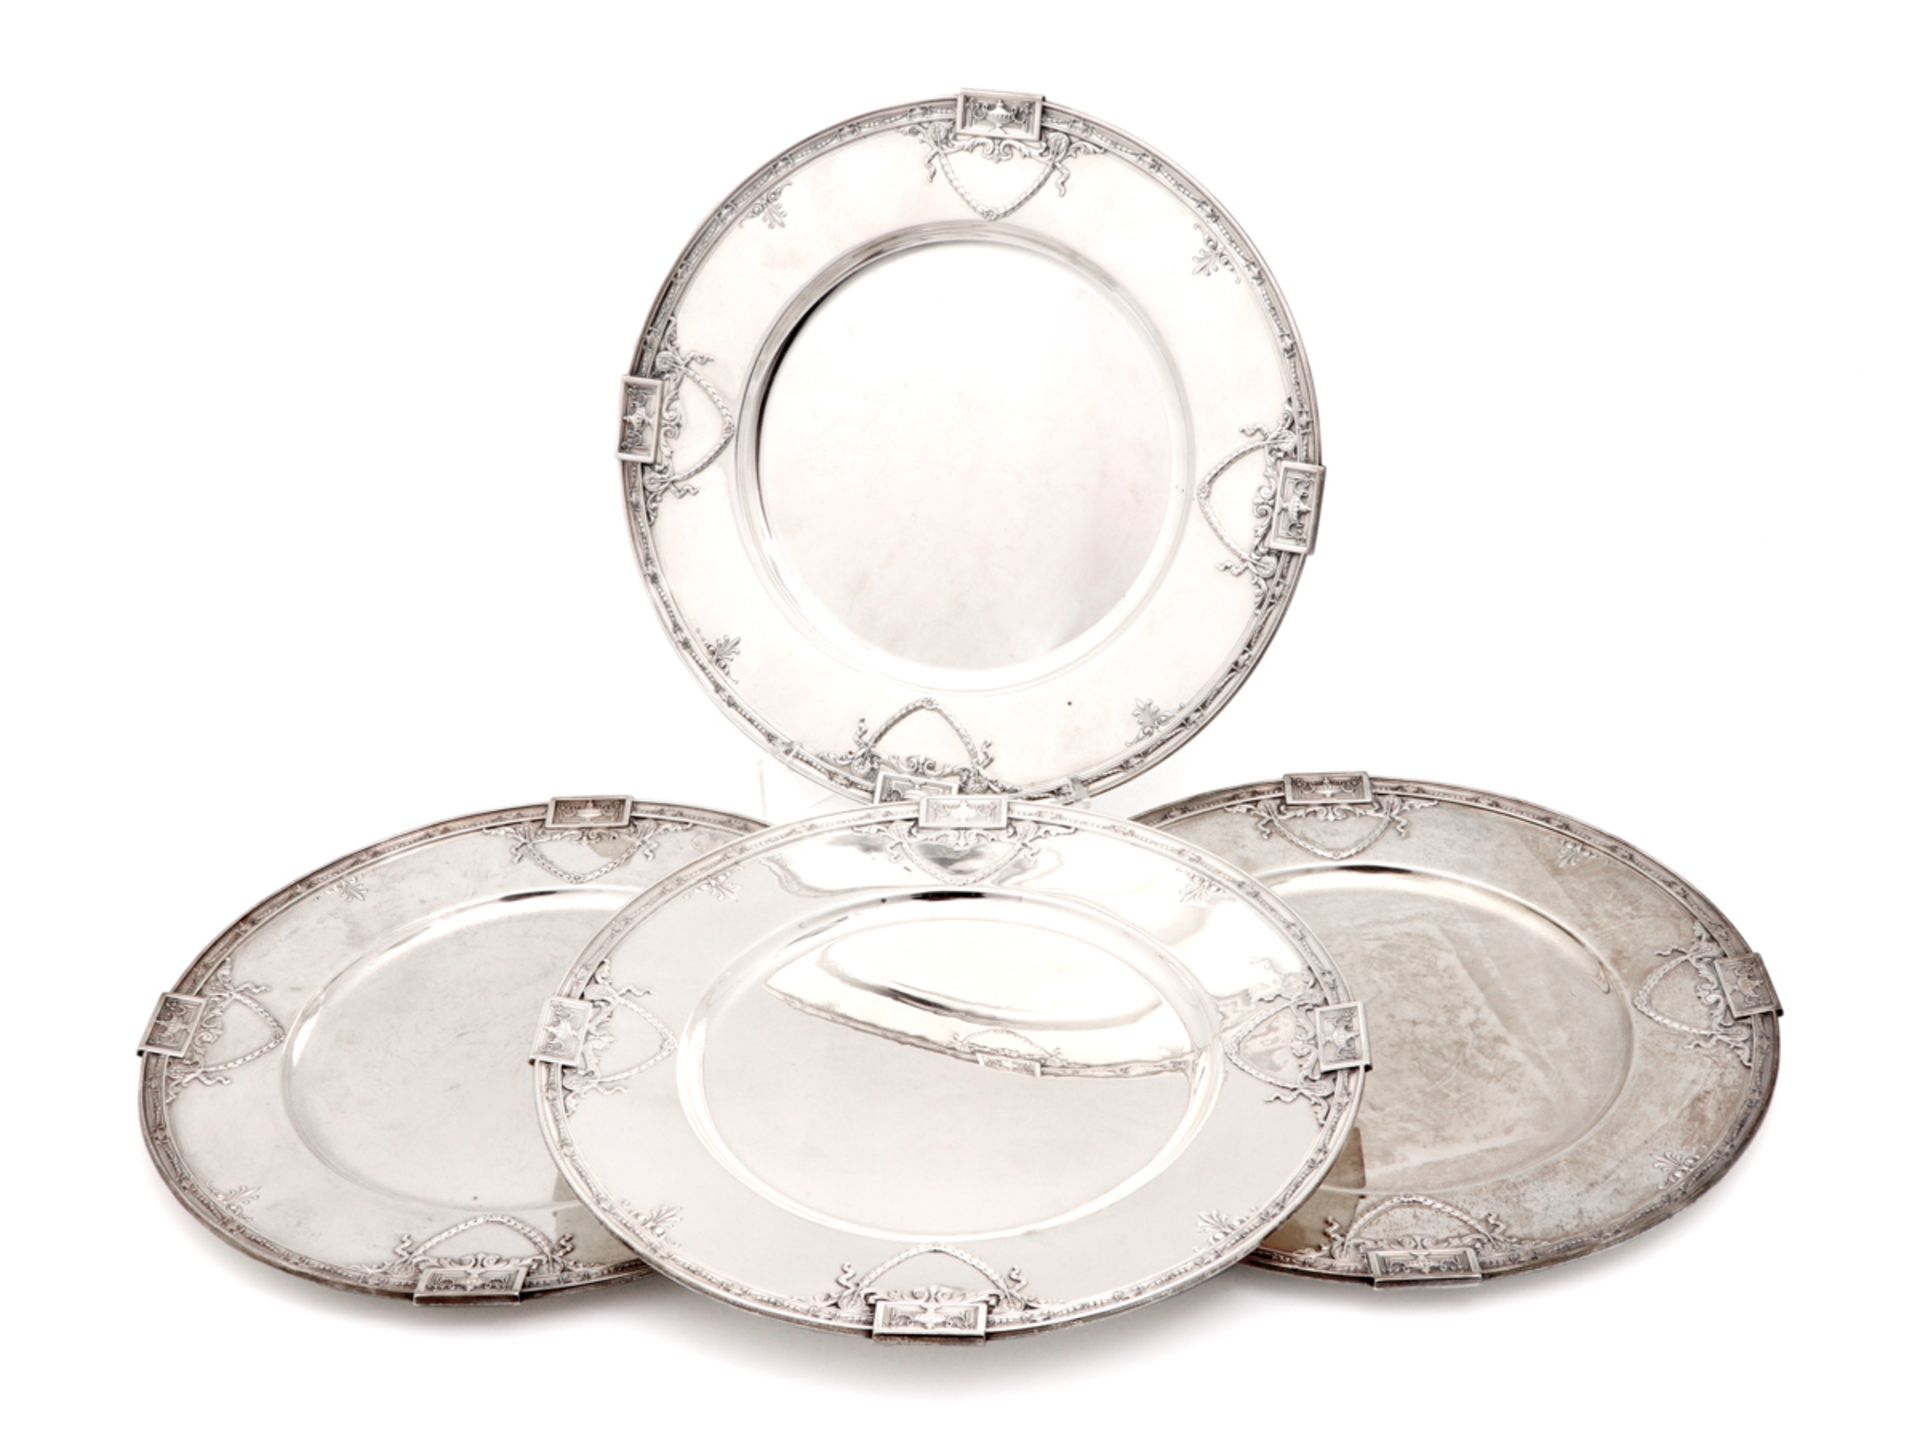 FOUR AMERICAN SILVER CHARGER PLATES 925/000 silver, American work by Gorham company, early 20th